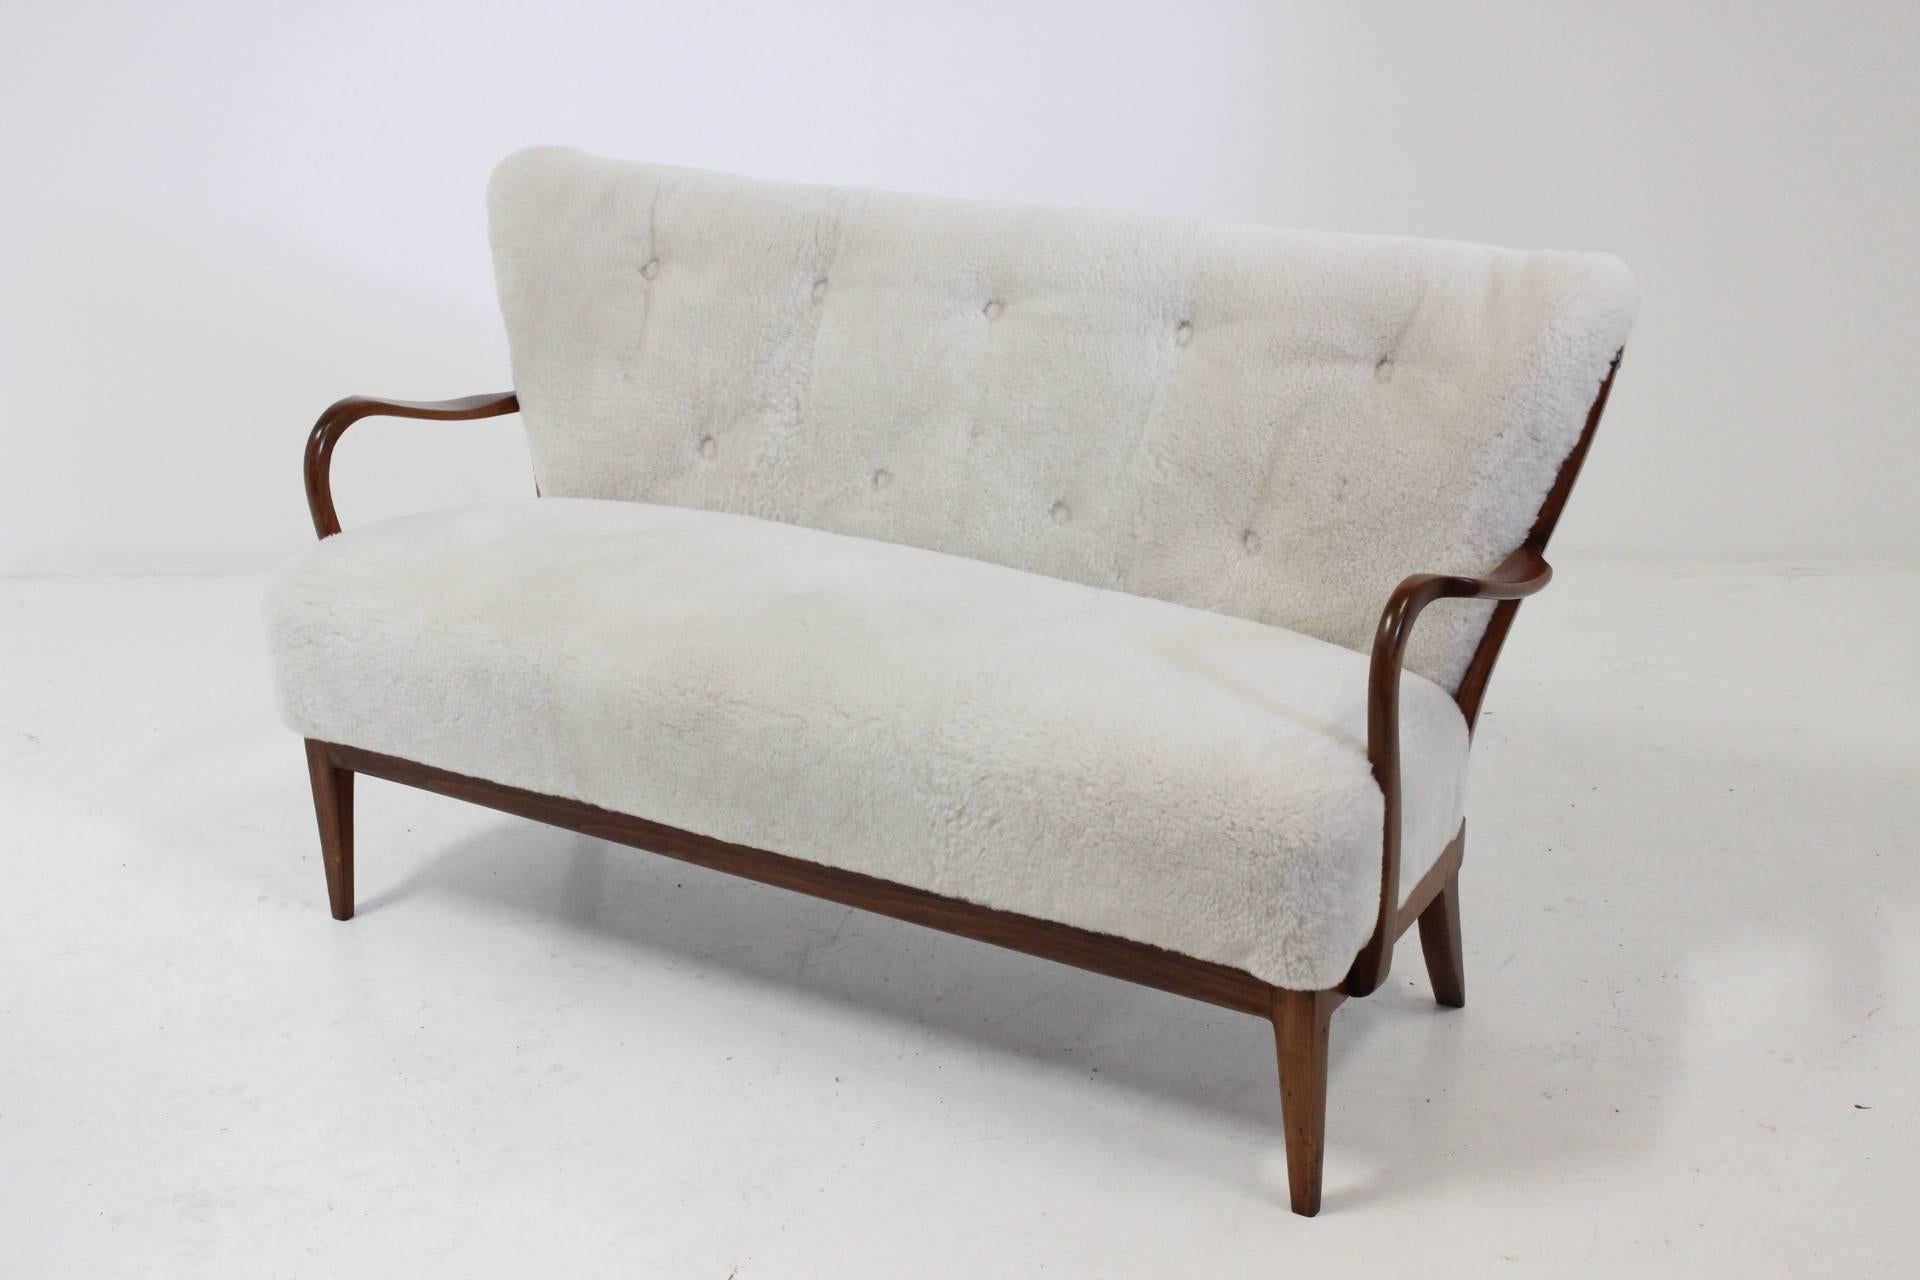 Beautiful wooden sofa in sheepskin upholstery suitable for open spaces.
The sheepskin were carefully selected and their weren't chemically treated (to be more white). The wooden frame was carefully restored.